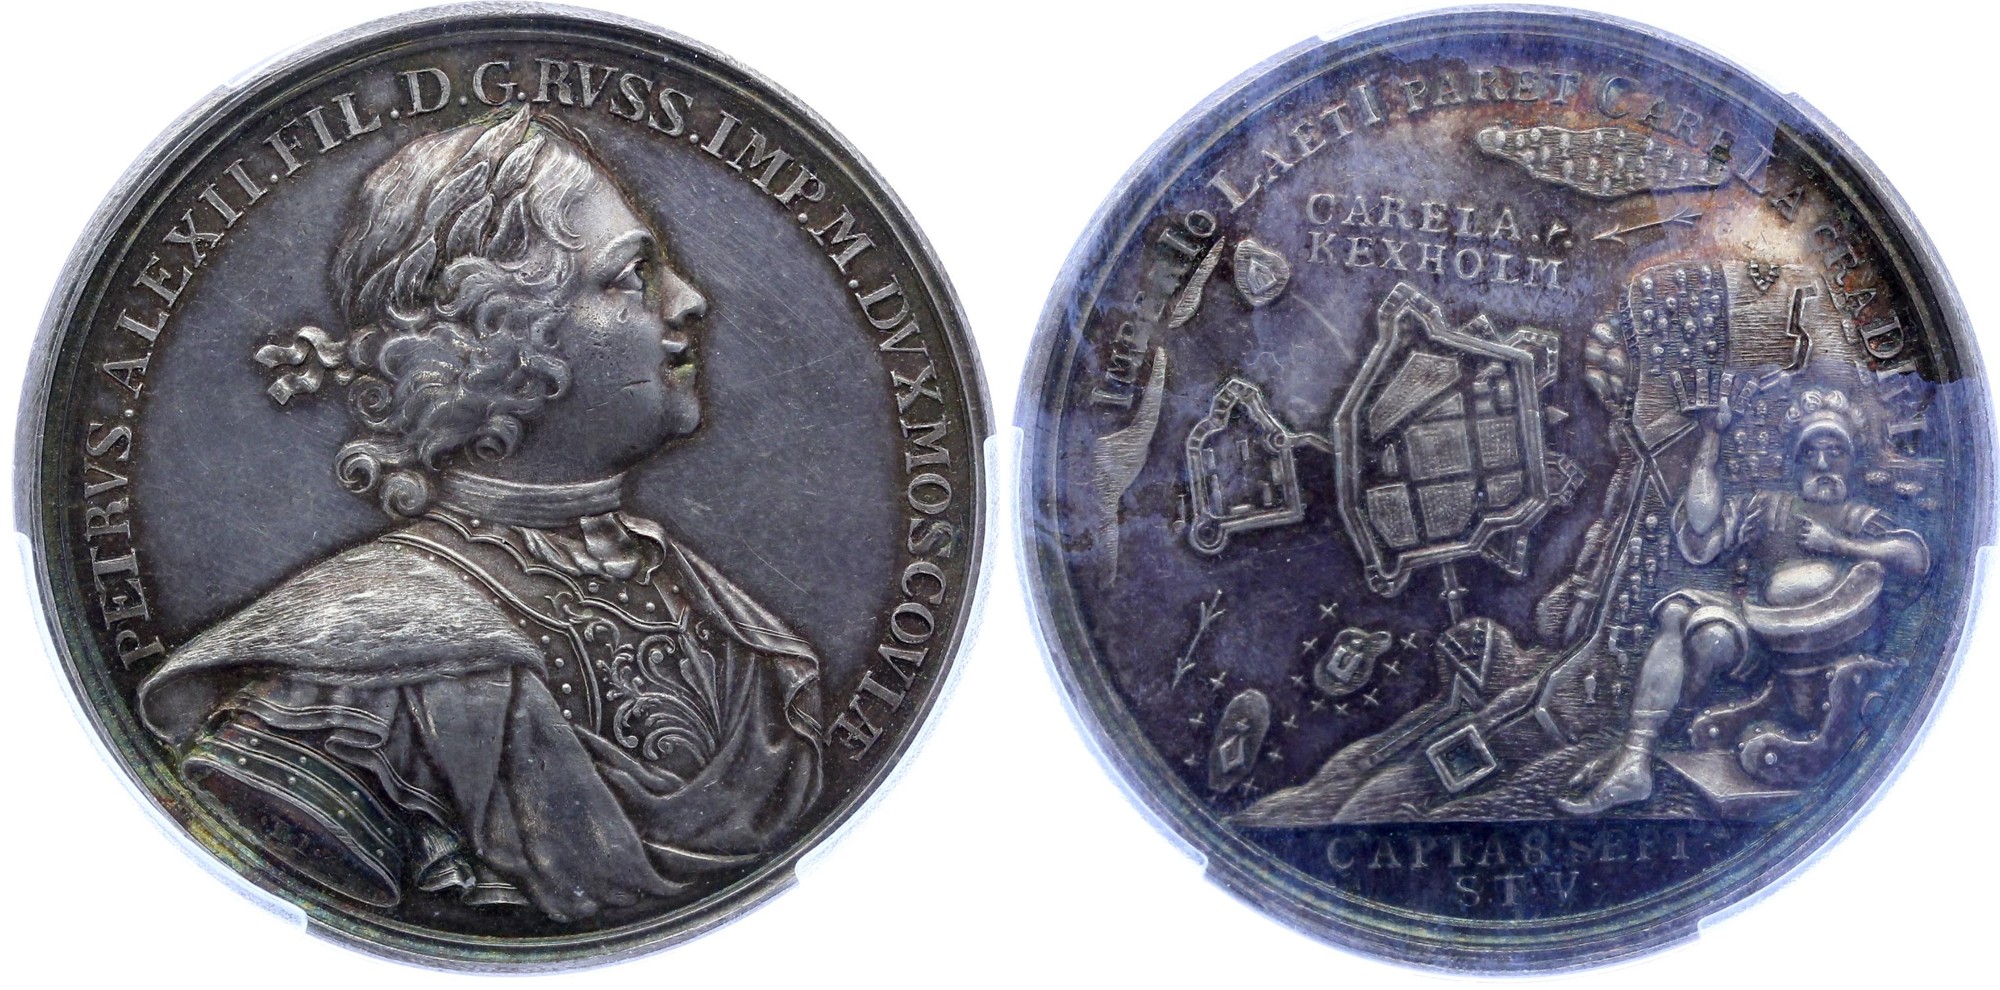 Russia - Capture of Kexholm Silver Medal, ND (1710).